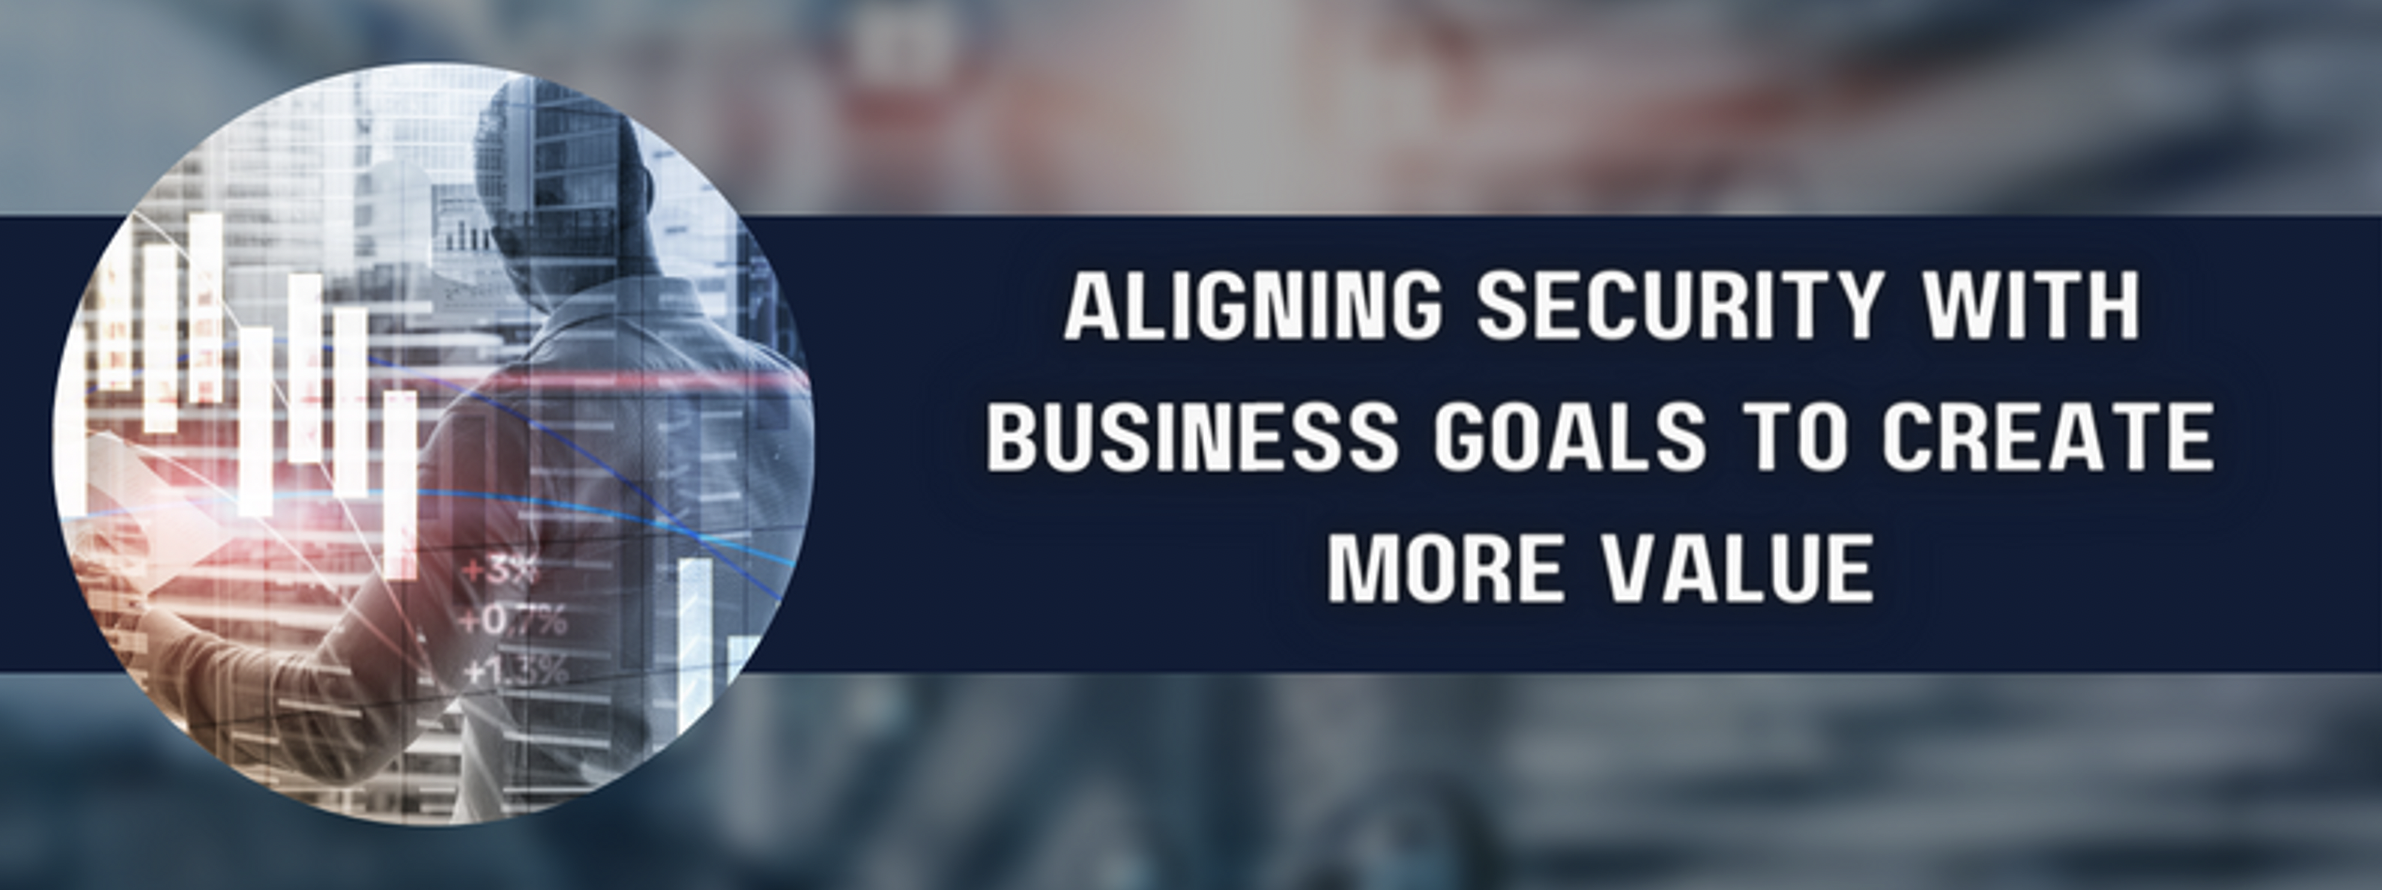 Aligning Security with Business Goals to Create More Value